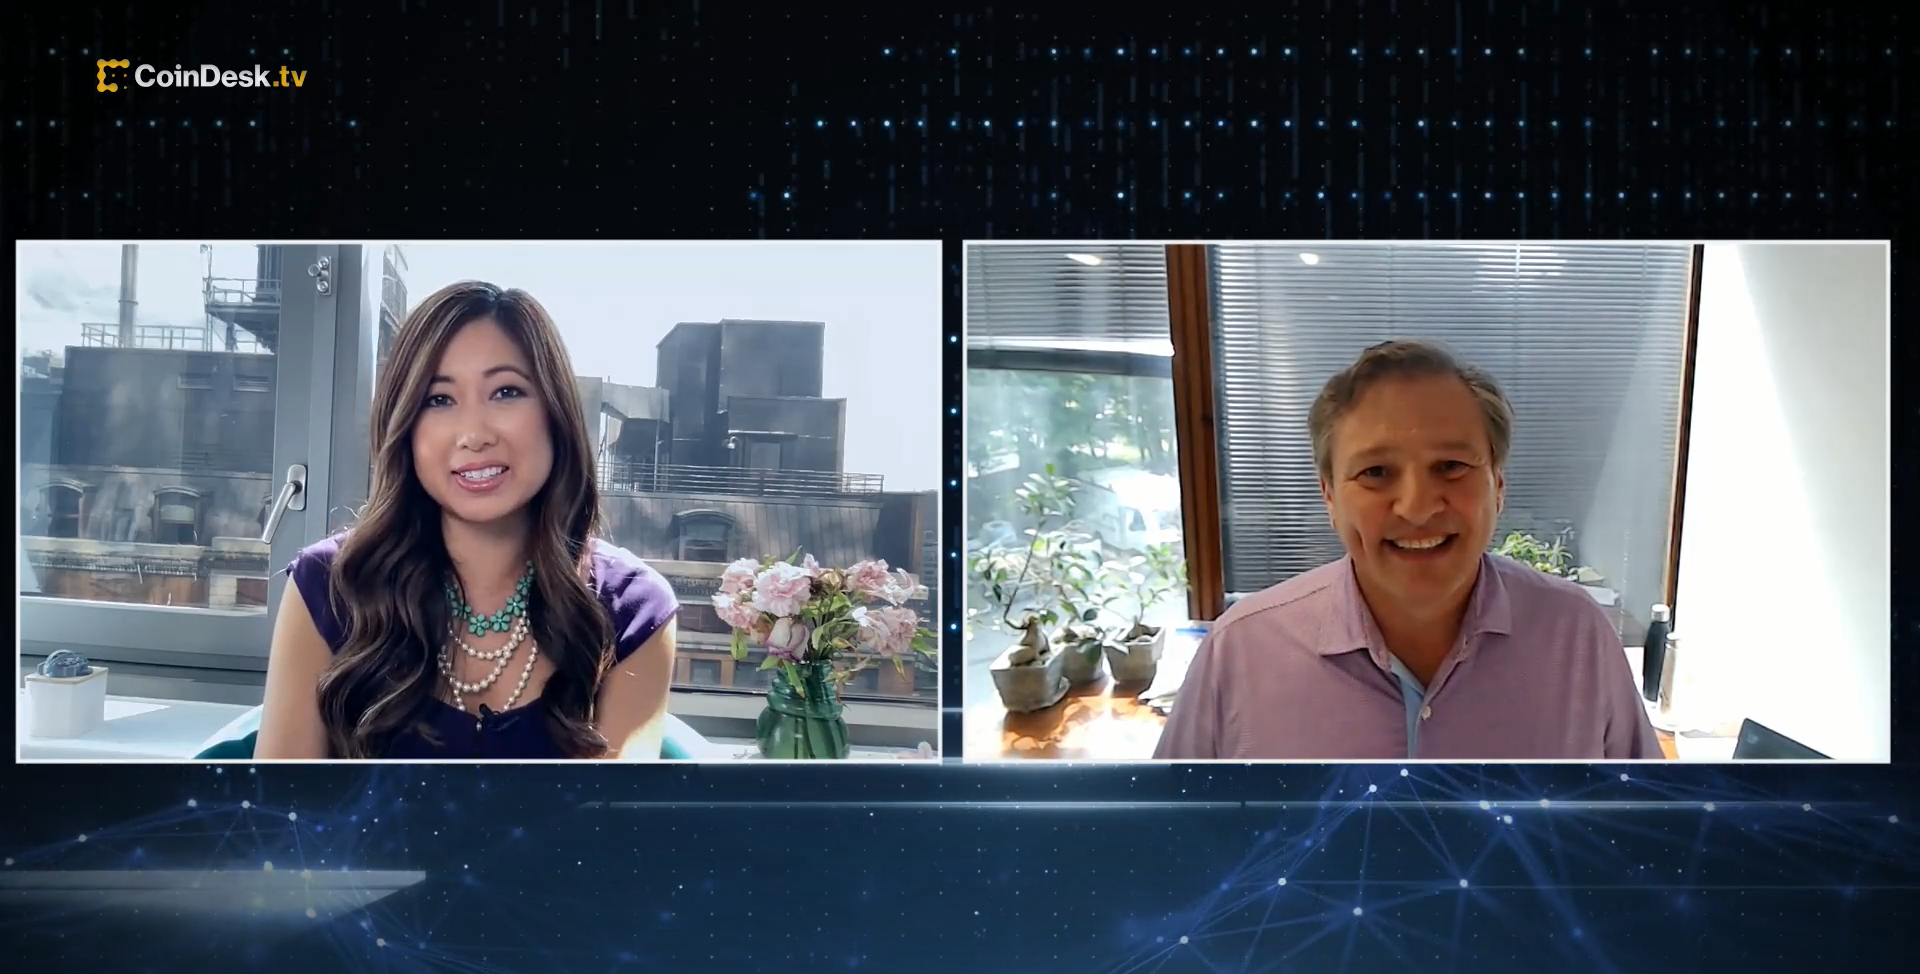 Pat LaVecchia of Oasis Pro Markets LLC shares bitcoin markets analysis on CoinDesk TV